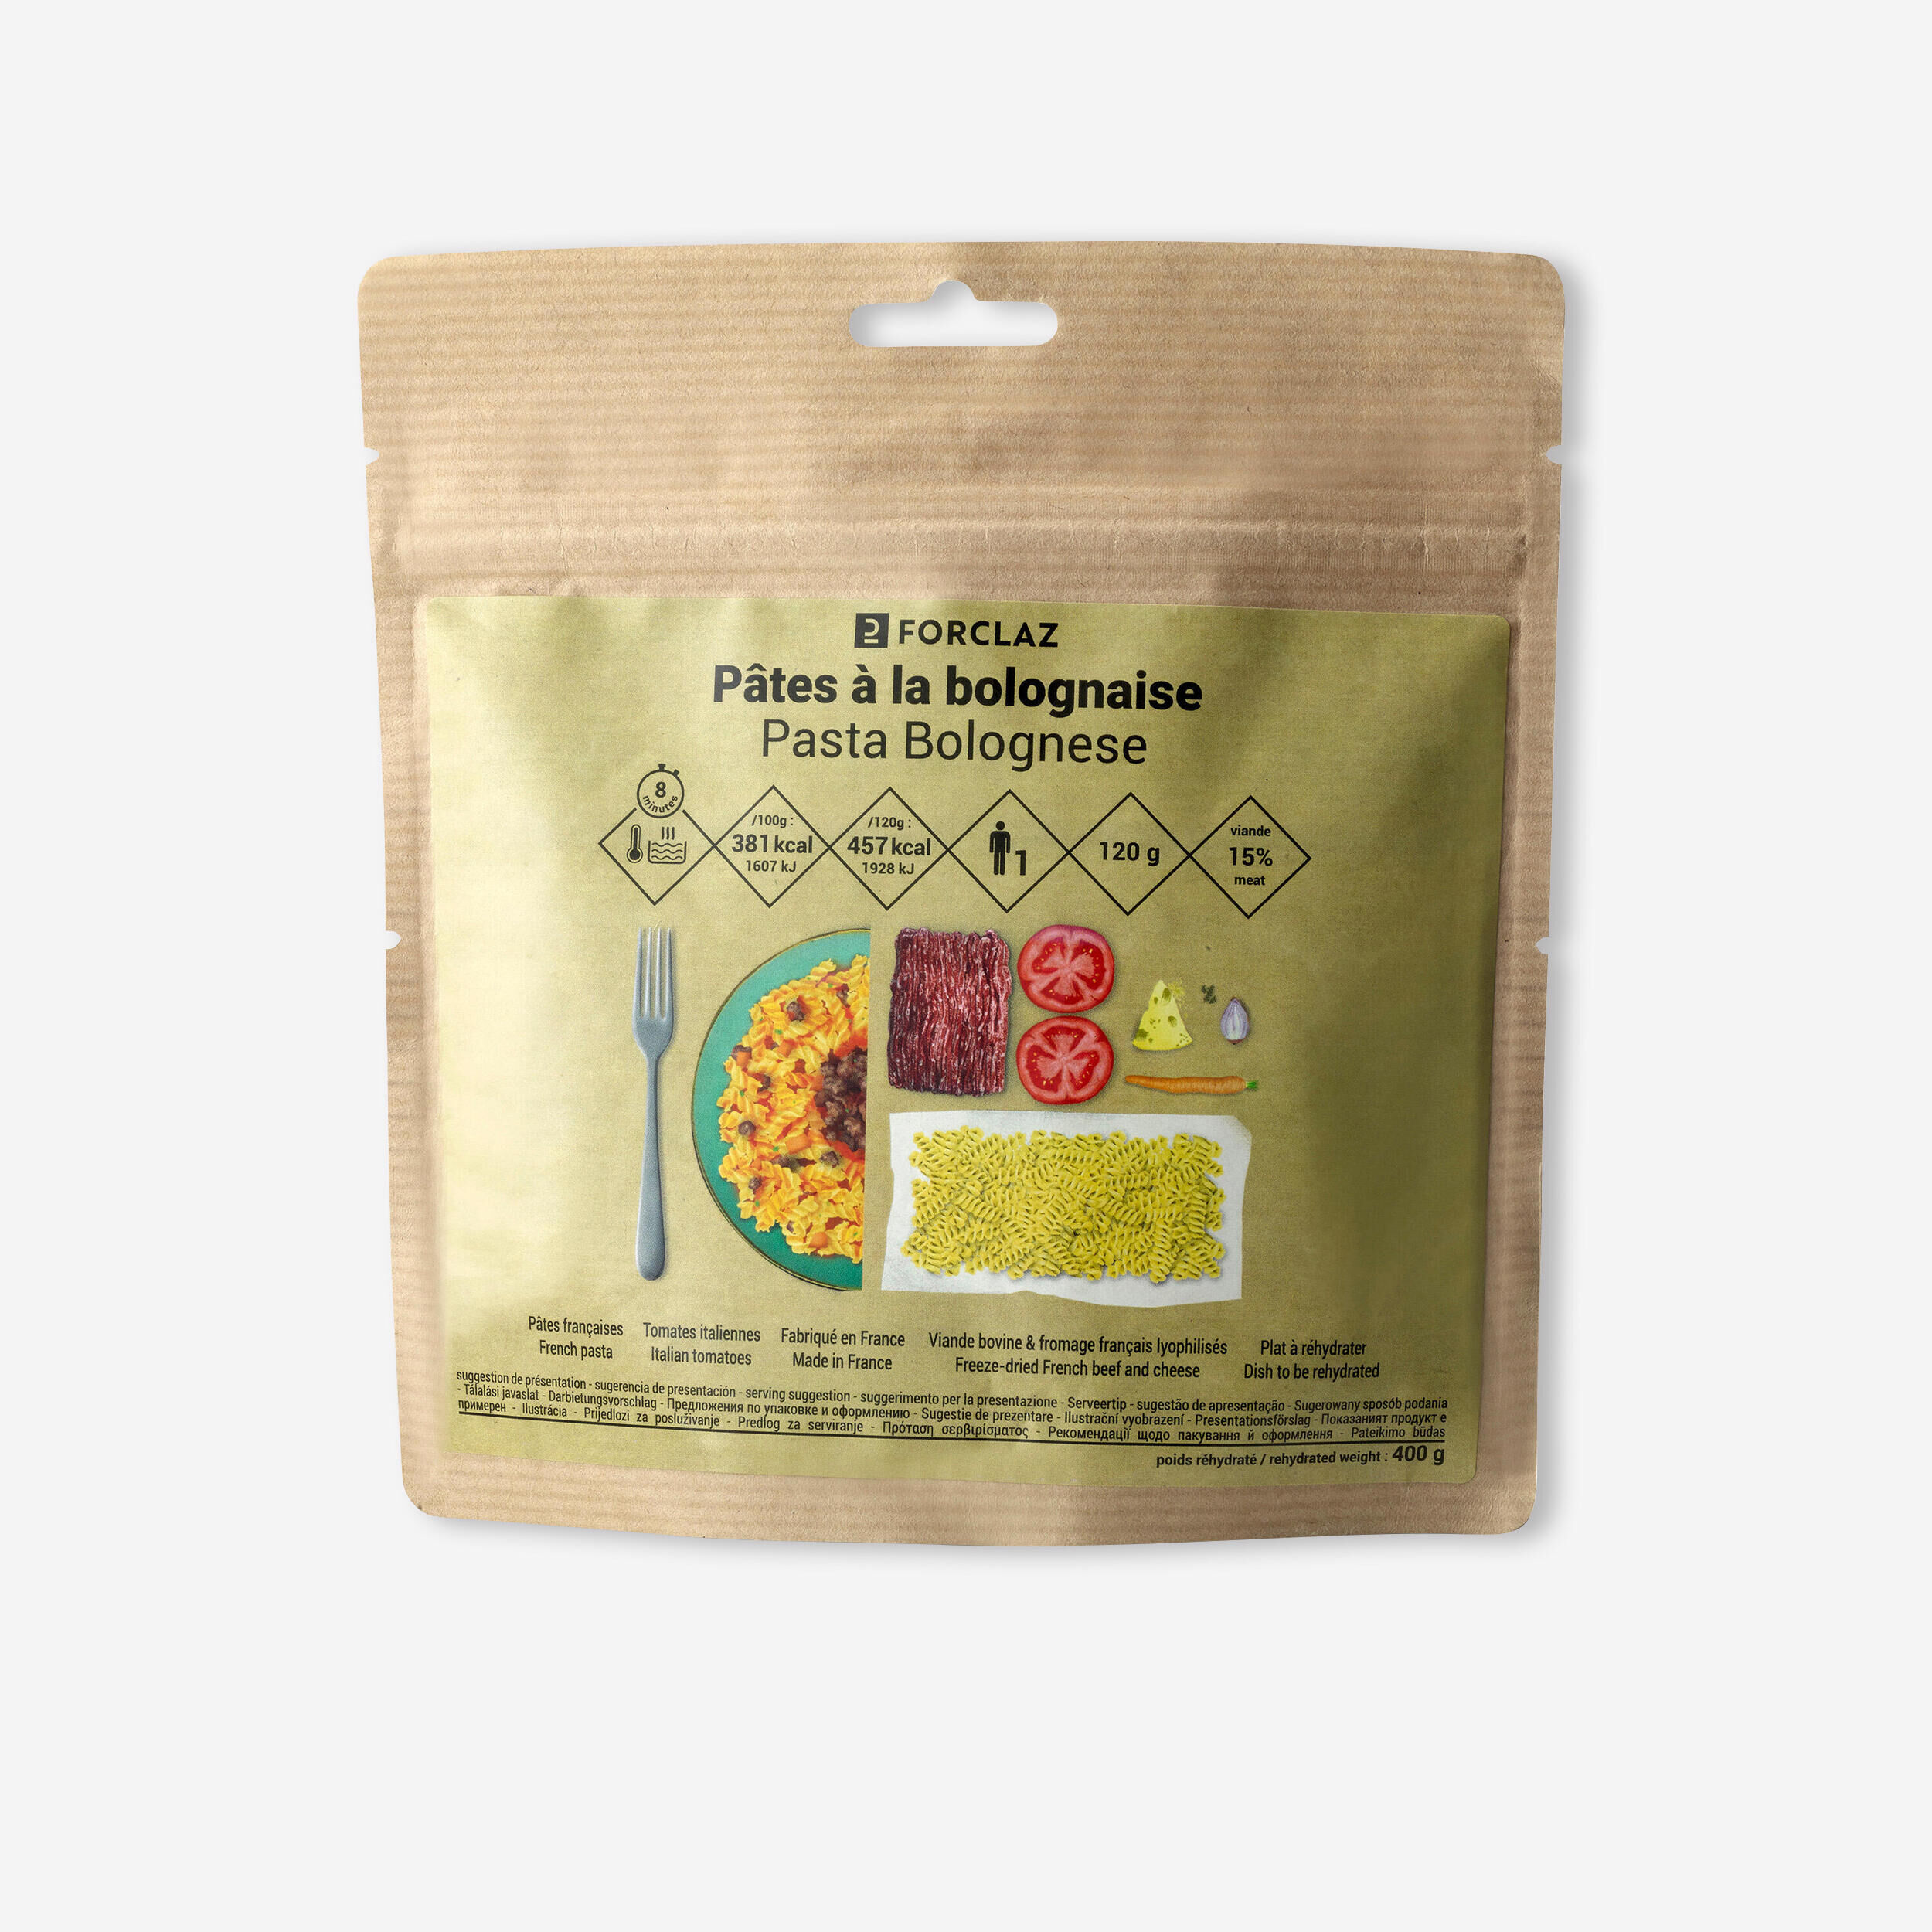 FORCLAZ Pasta Bolognese Dehydrated Meal - 120g